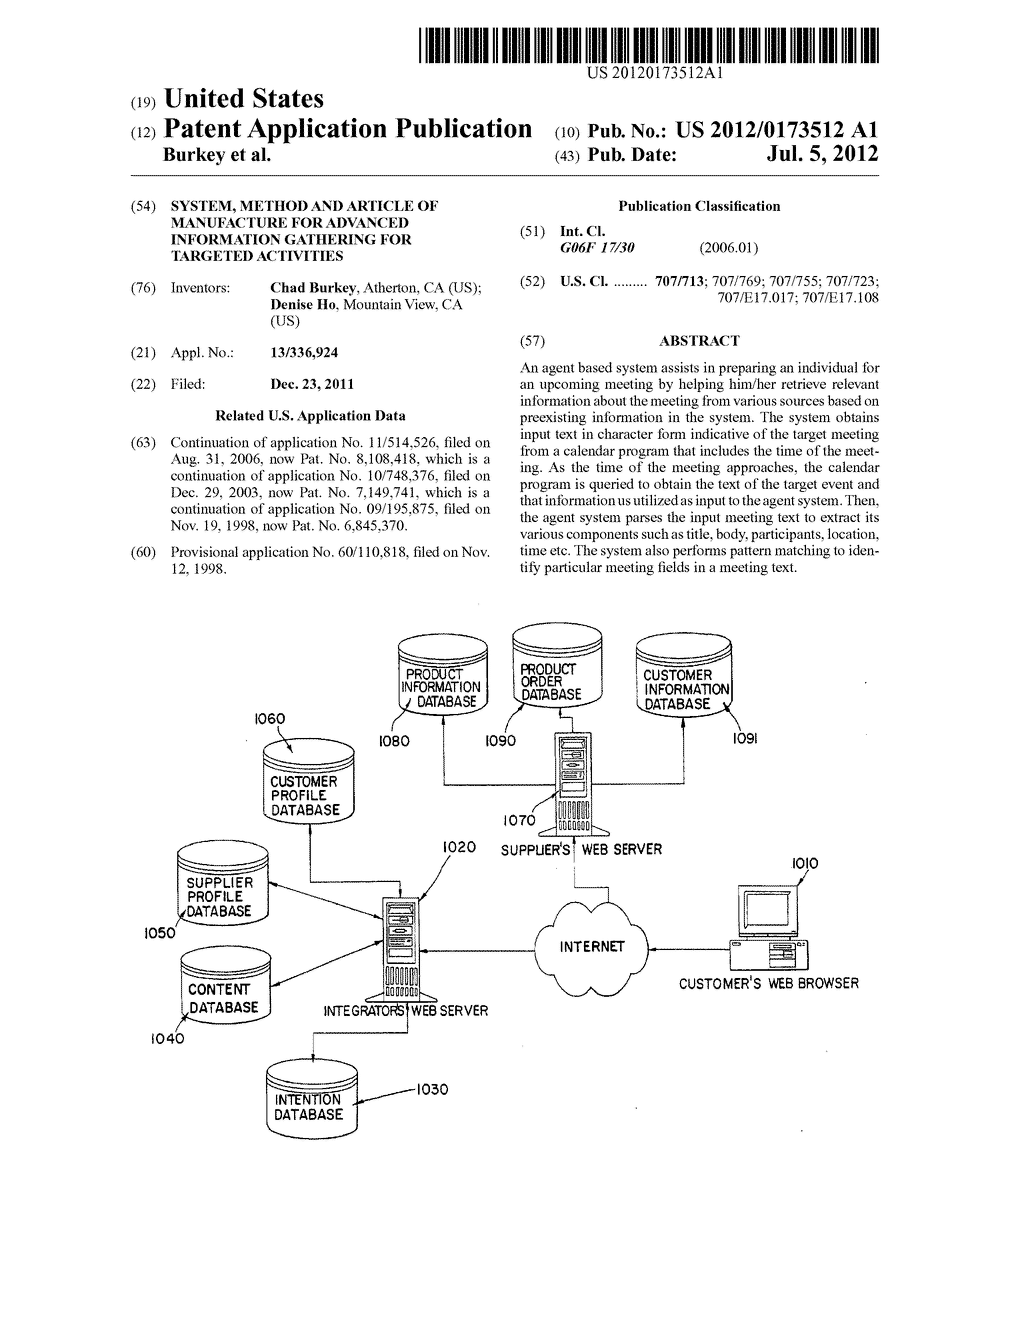 System, Method and Article of Manufacture for Advanced Information     Gathering for Targeted Activities - diagram, schematic, and image 01